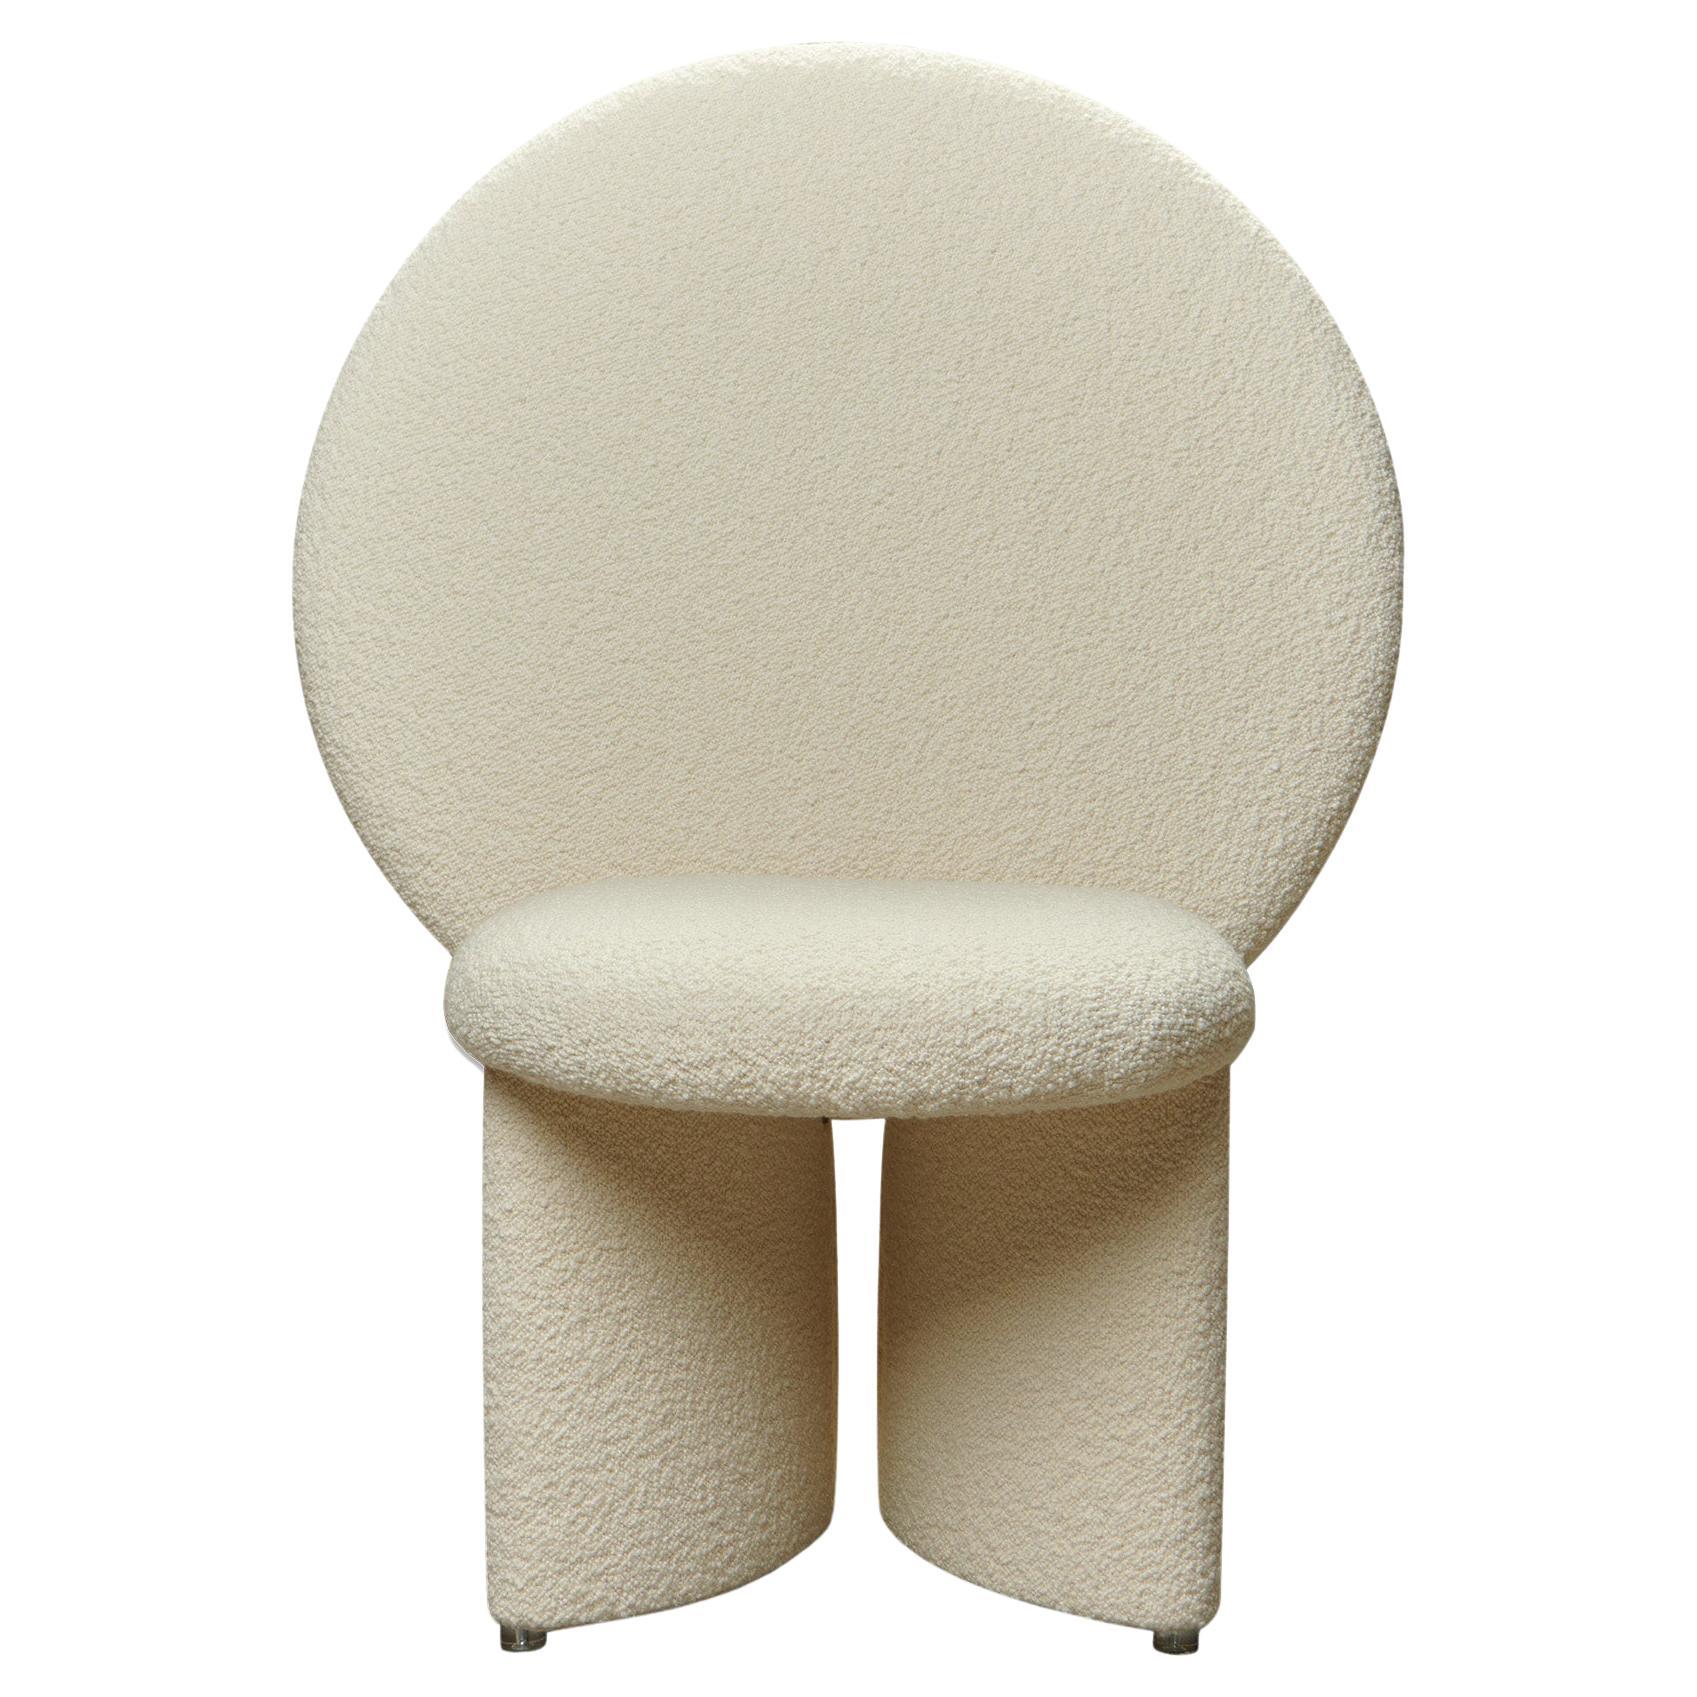 Afternoon Chair with Large Back by Lara Bohinc Cream Boucle Fabric, in stock